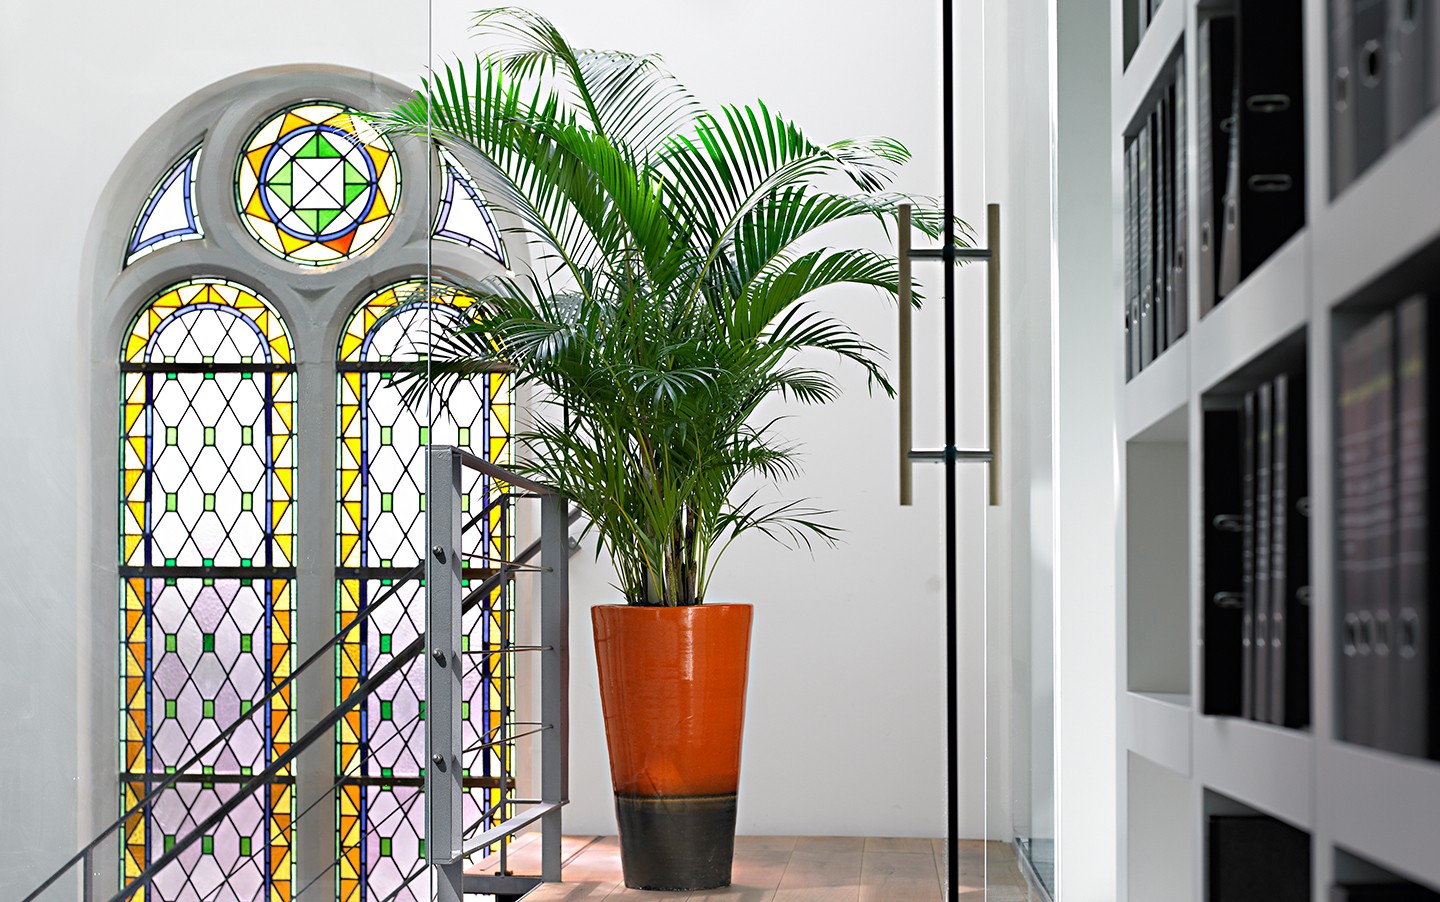 Great plants for offices – Kentia Palm